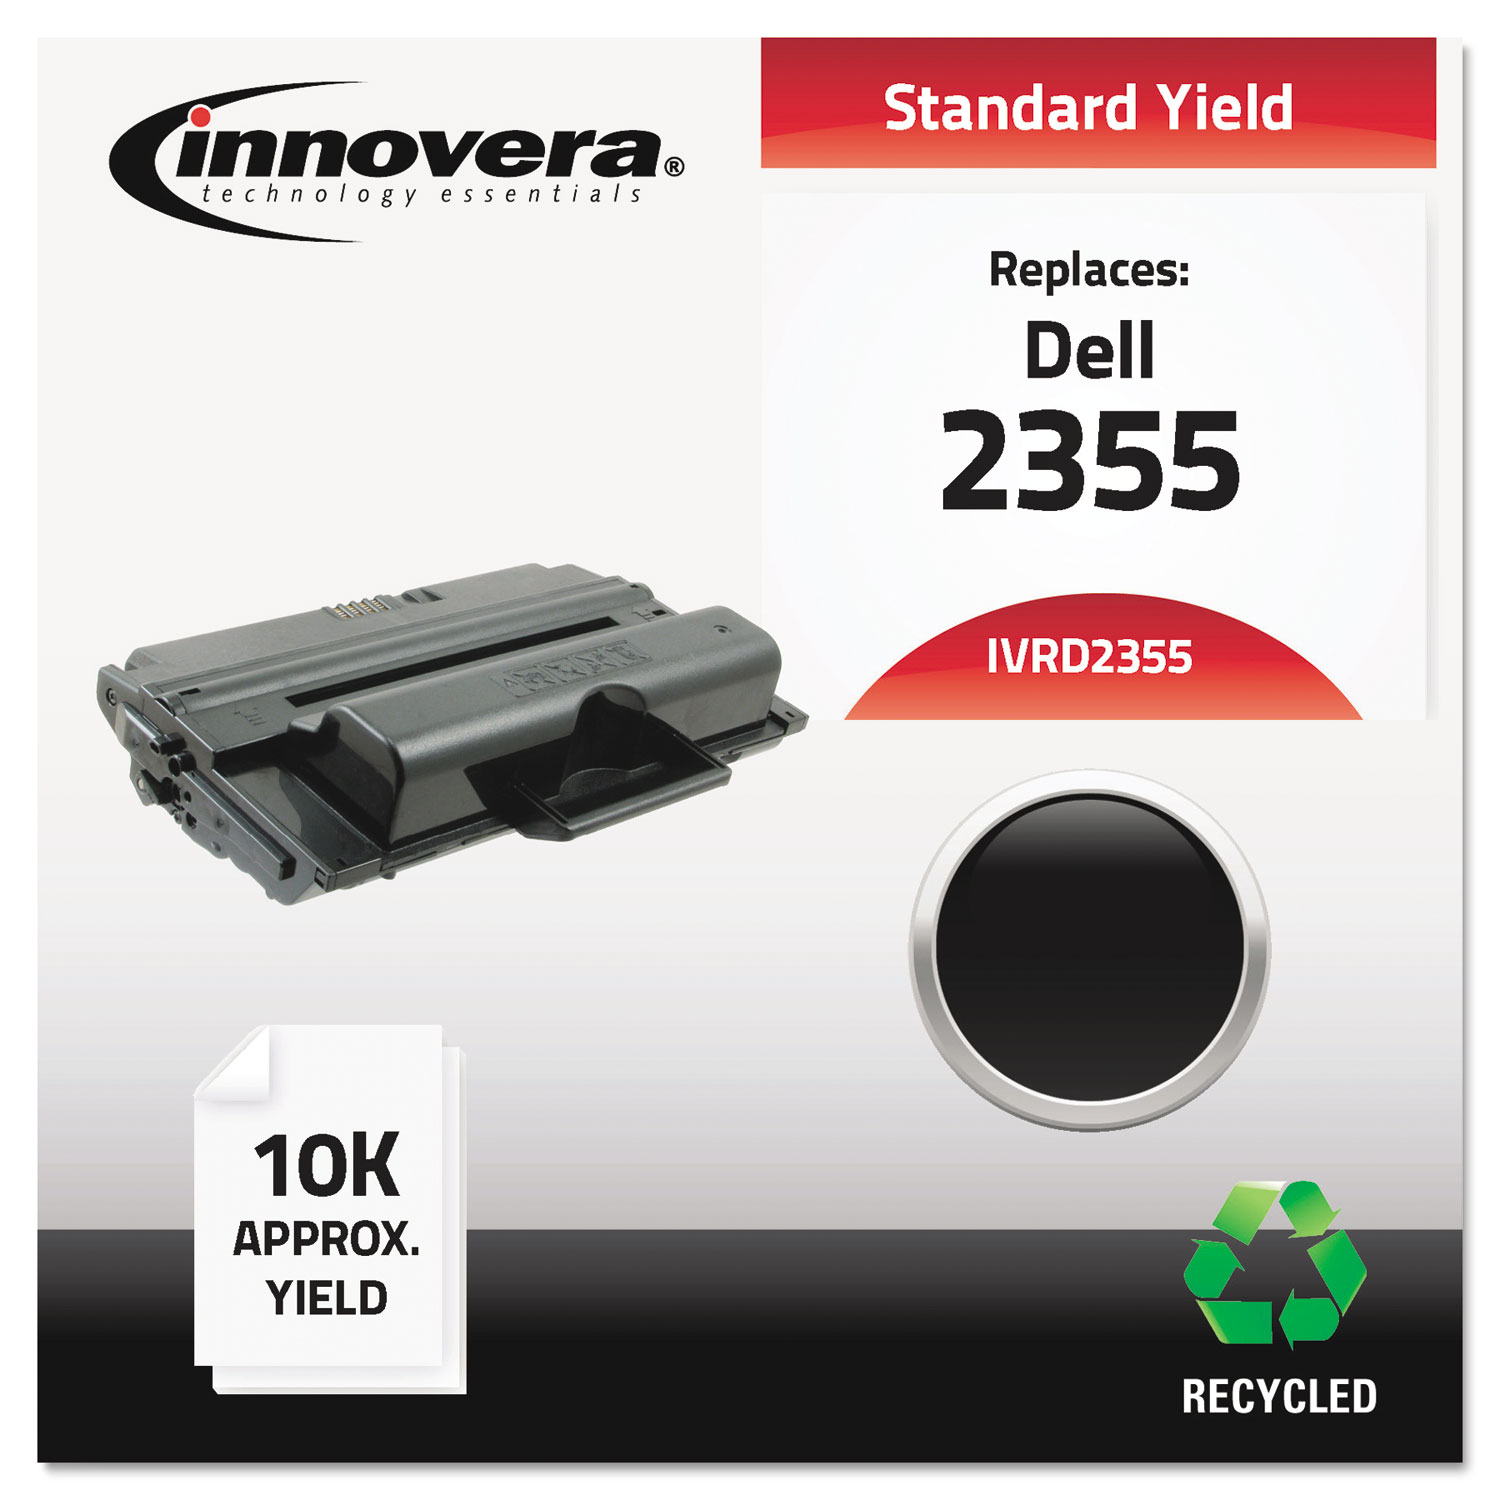 Remanufactured 331-0611 (2355) Toner, 10000 Page-Yield, Black